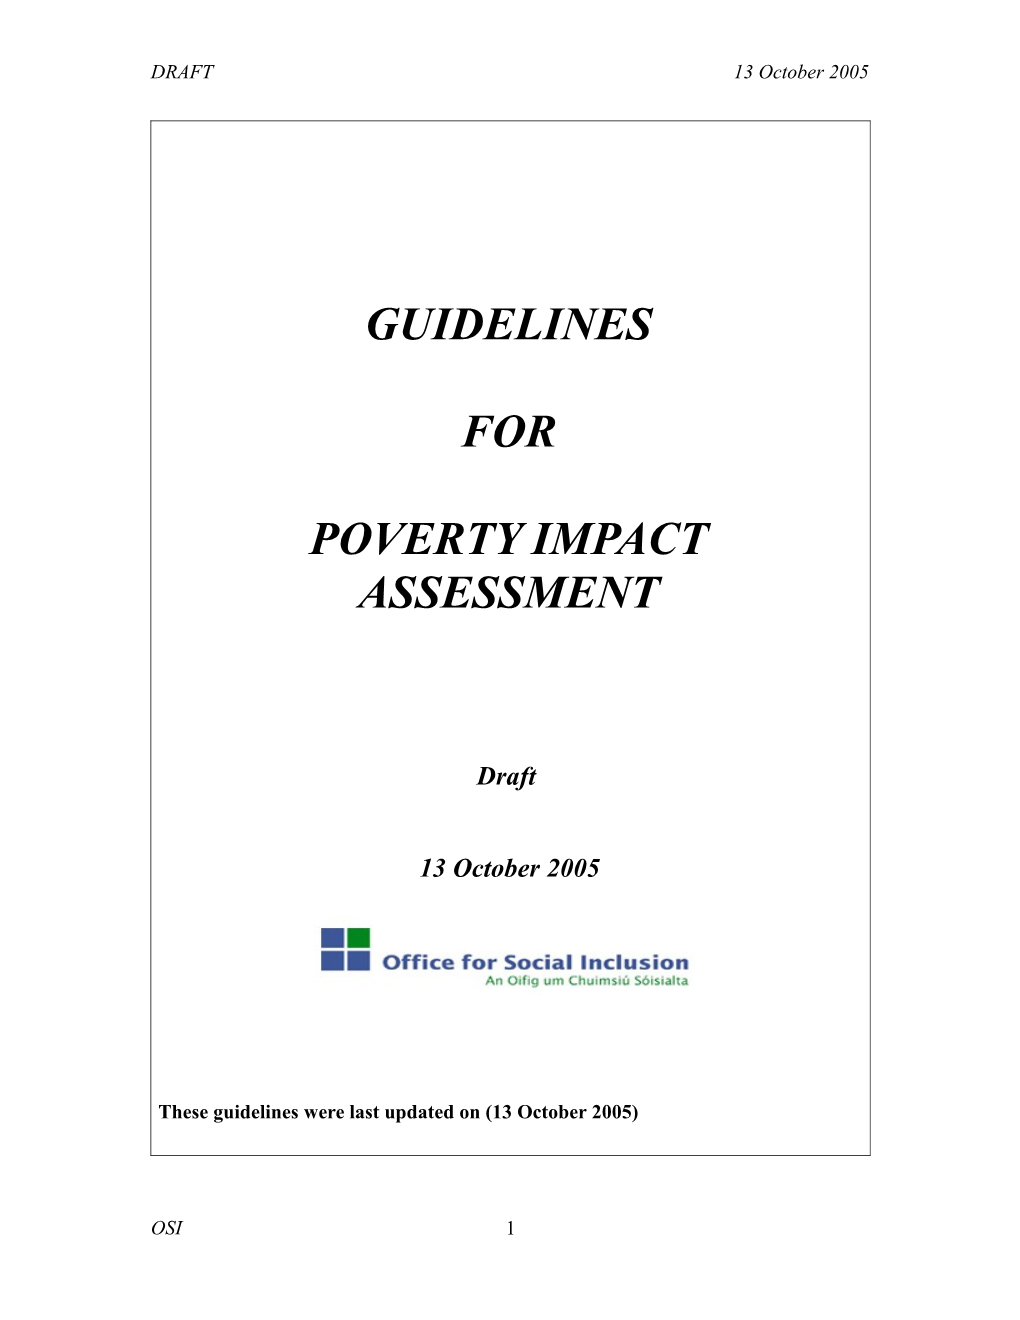 Poverty Impact Assessment